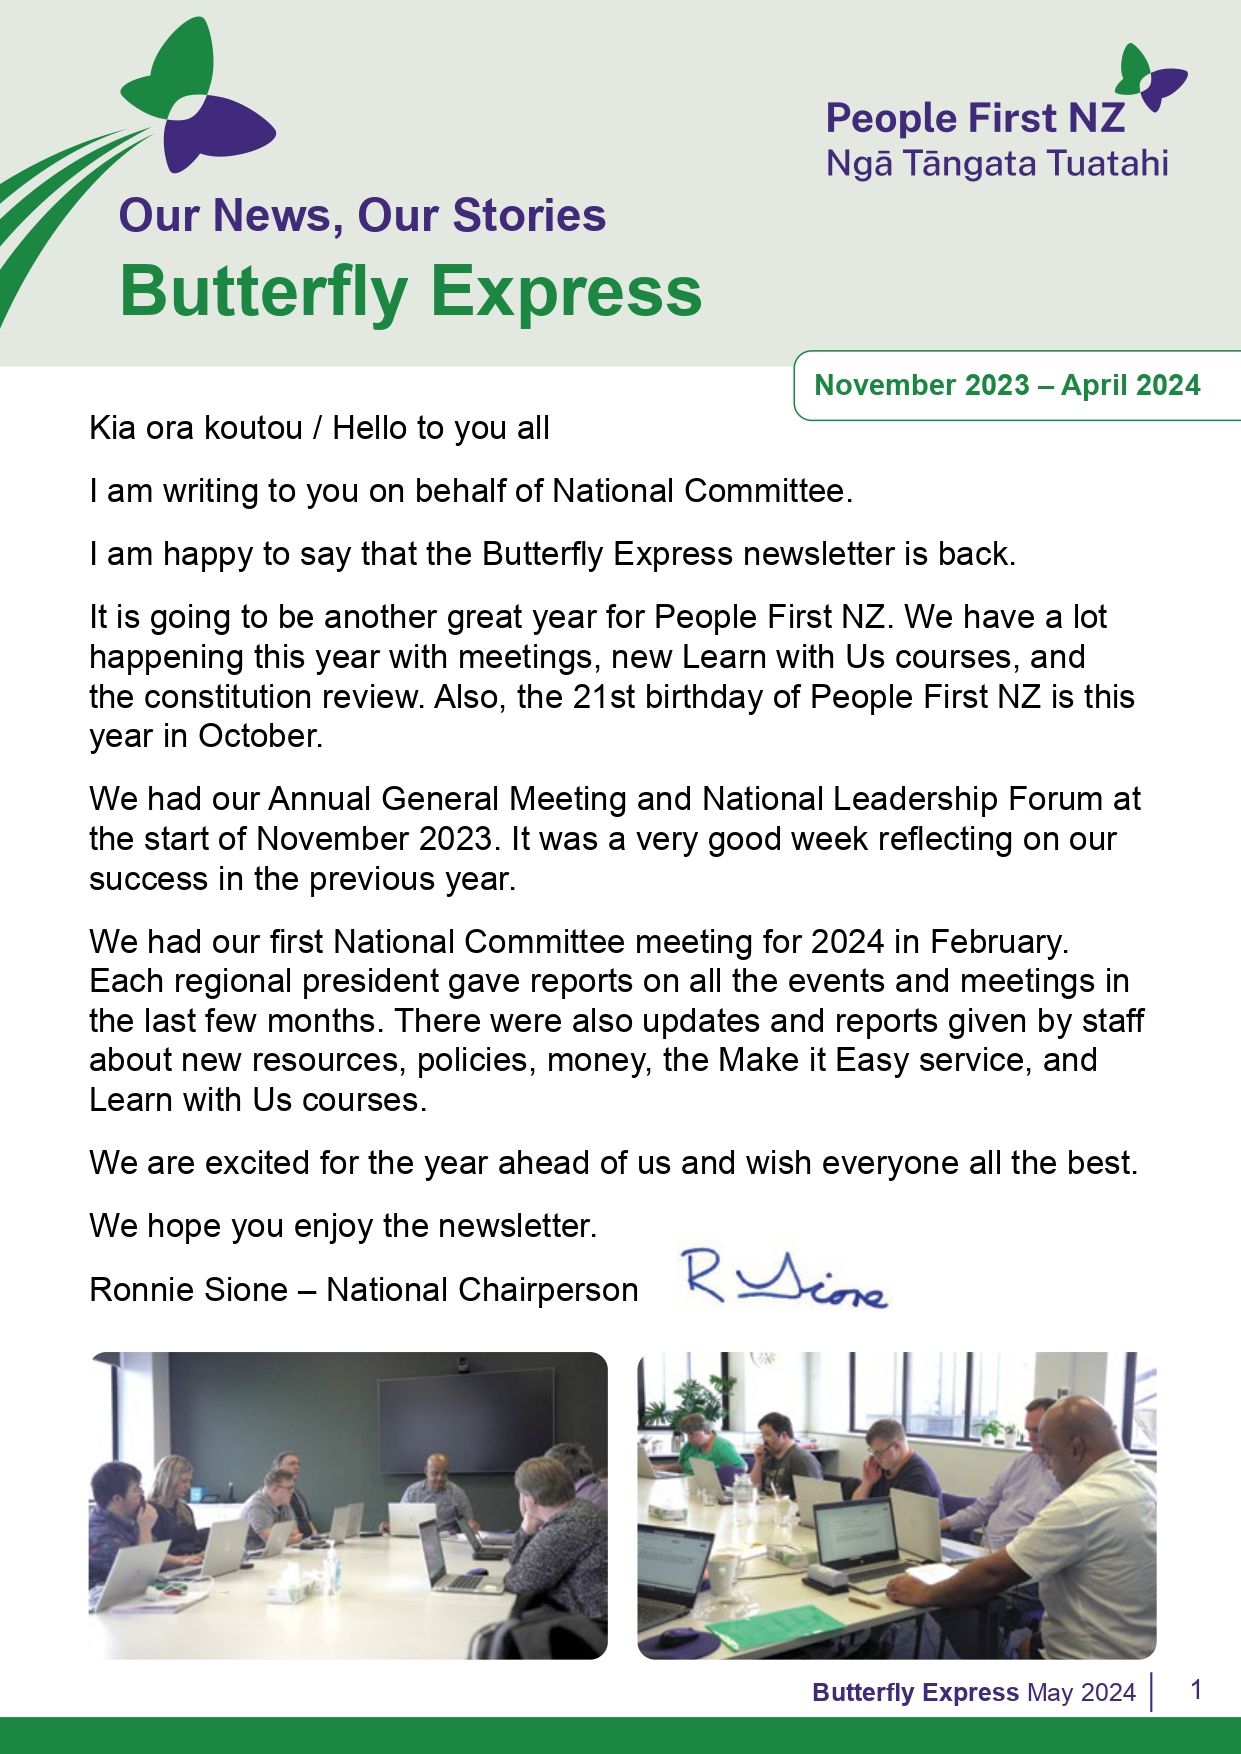 The front cover image of the Butterfly Express Newsletter